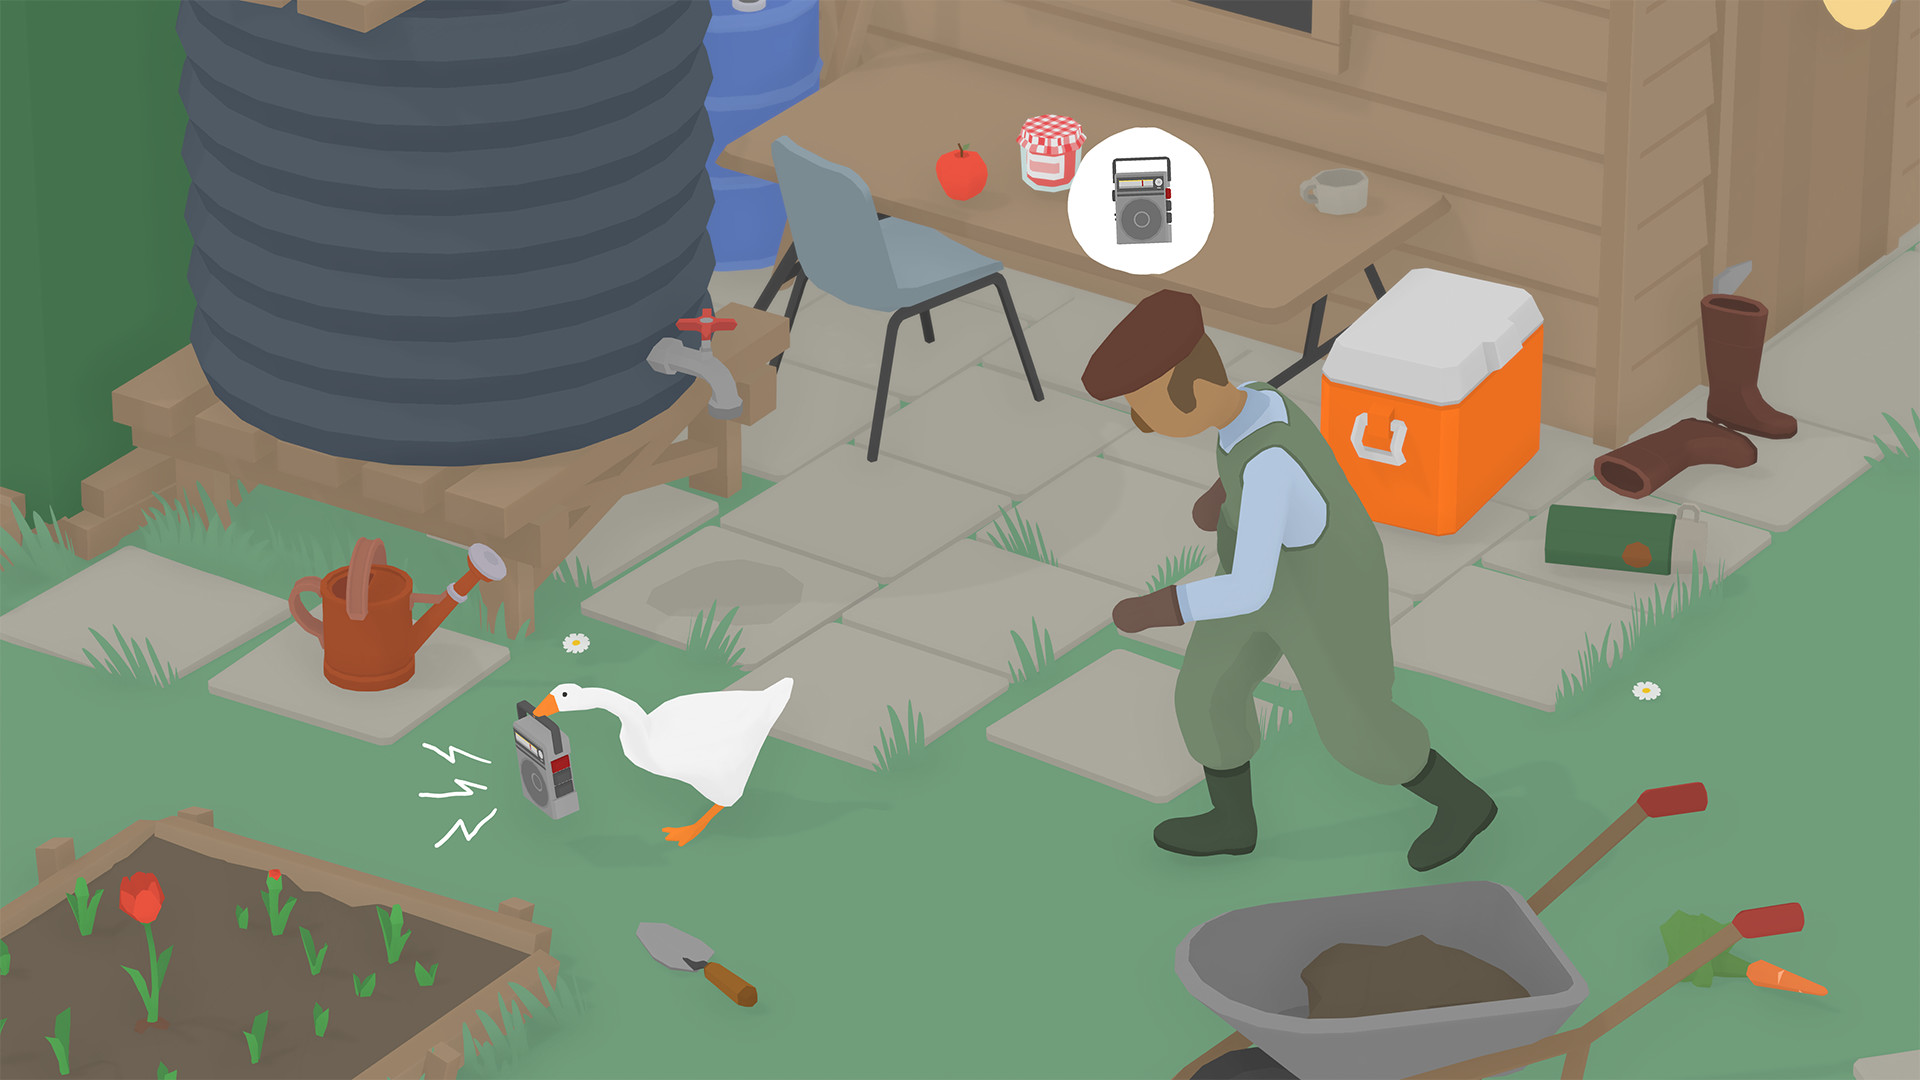 untitled goose game steam download